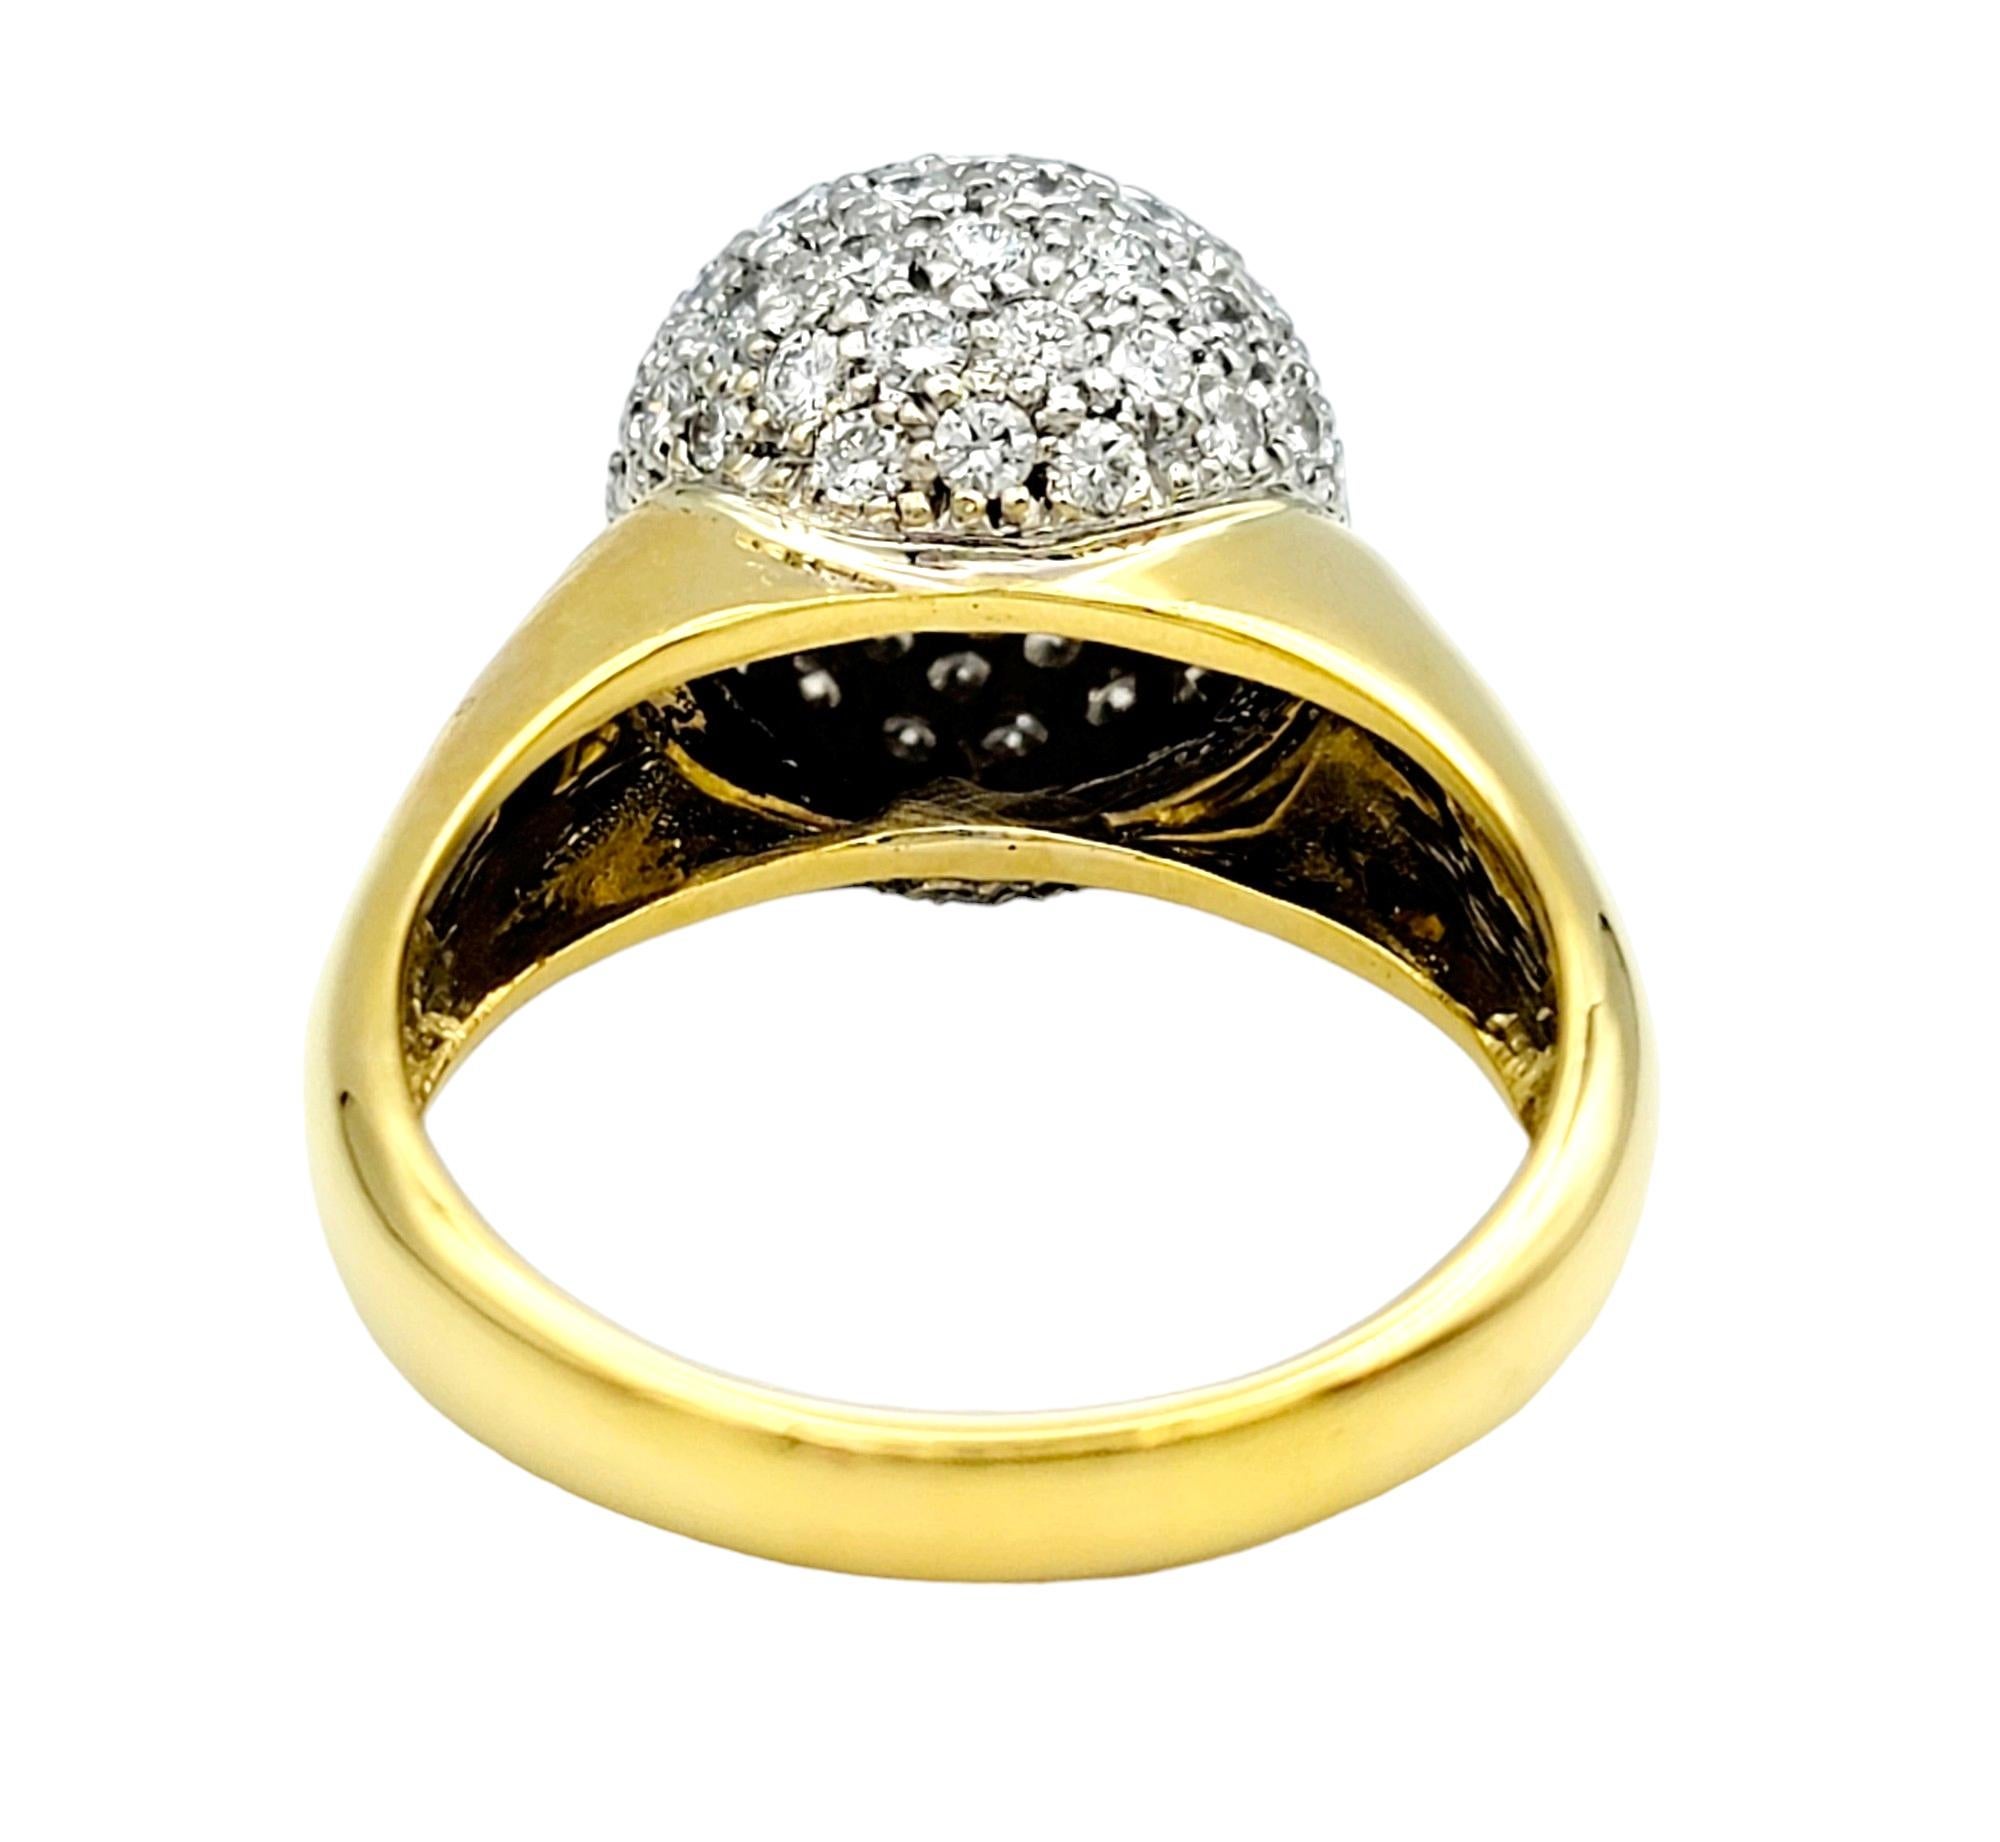 2.00 Carat Total Pave Diamond Clustered Dome Ring 18 Karat Yellow Gold, F-G / VS For Sale 2